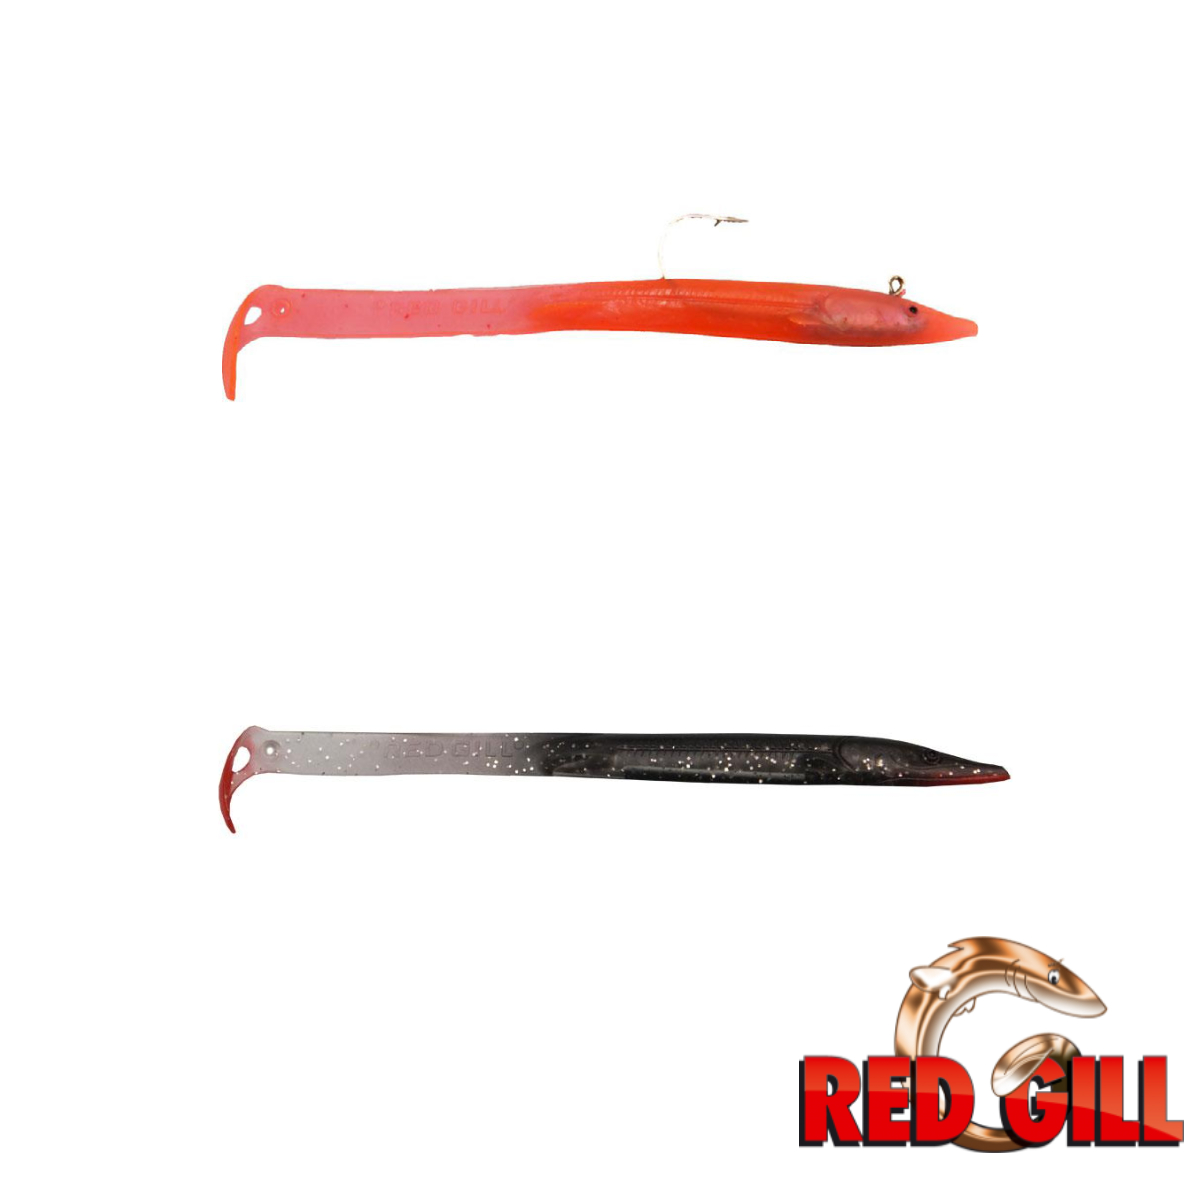 Red Gill Rascal 115mm Sand Eel Lures - Poingdestres